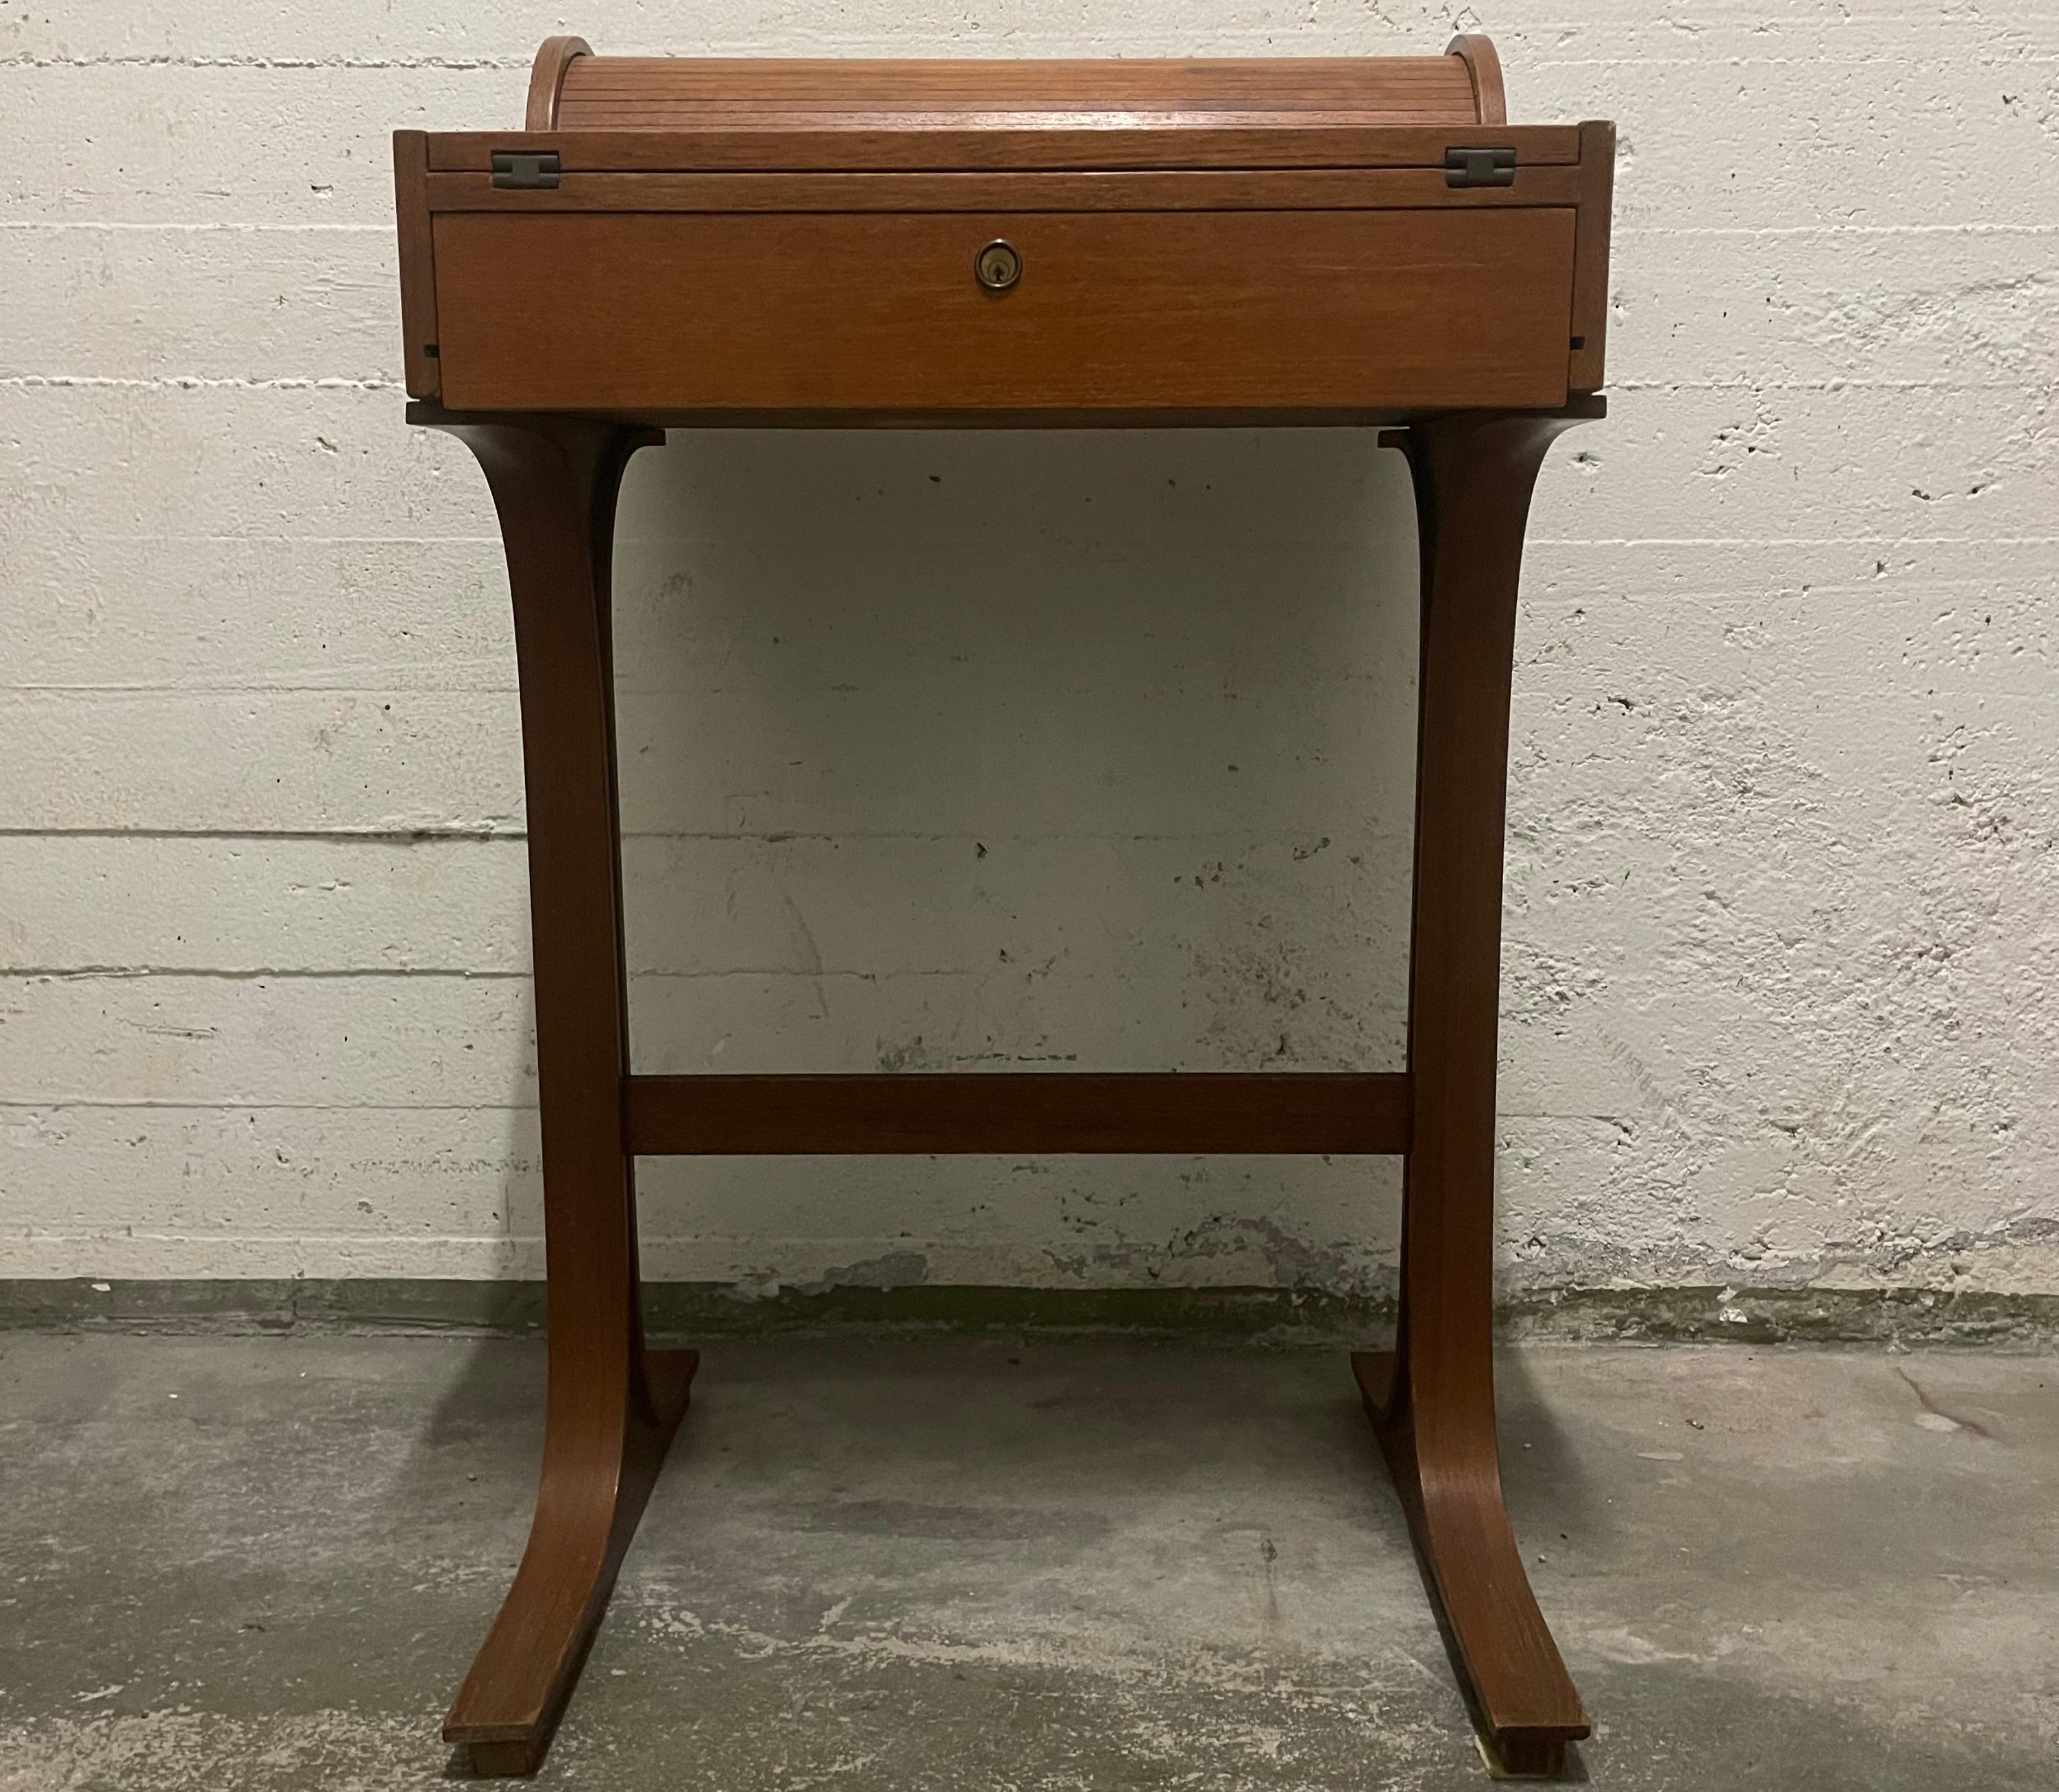 Very rare and elegant small desk by gianfranco frattini for bernini by opening the drawer the jalousie cover at the back opens. very special piece.